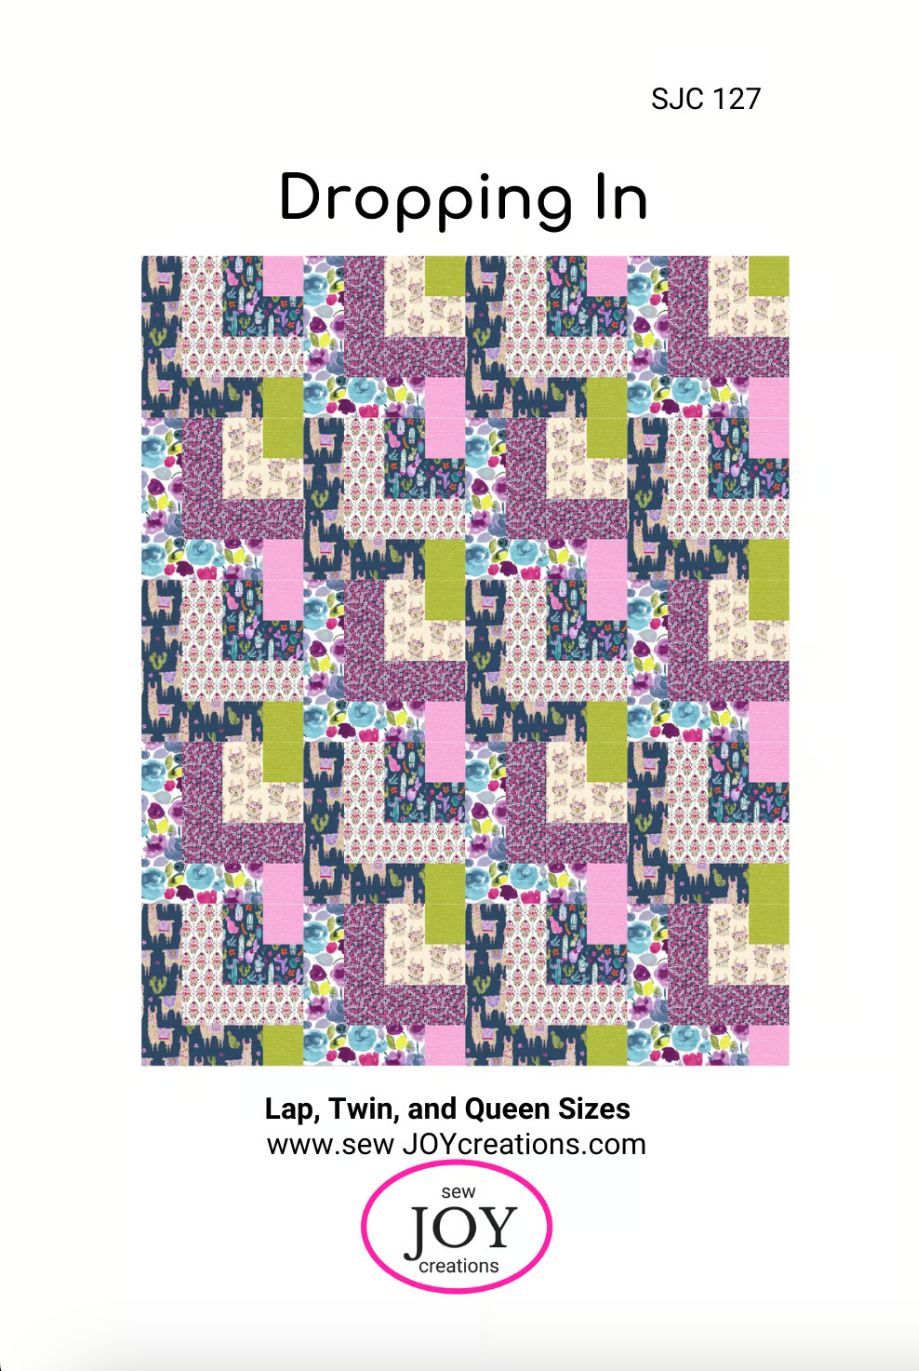 Dropping In Downloadable Pattern by Sew Joy Creations